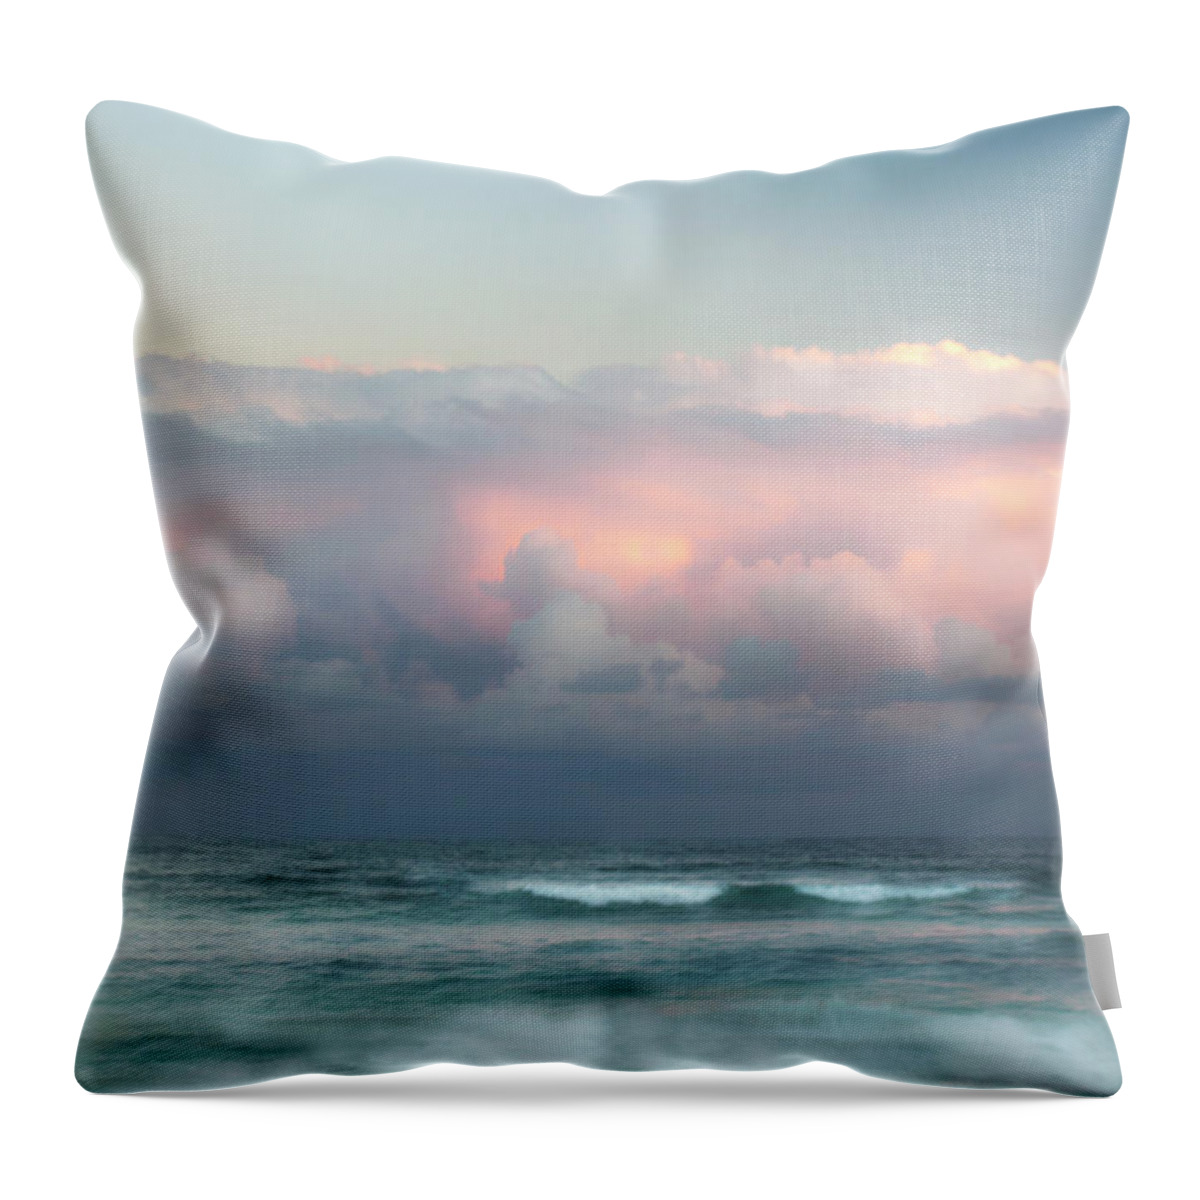 Ocean Throw Pillow featuring the photograph Ocean Sunset by David Chasey